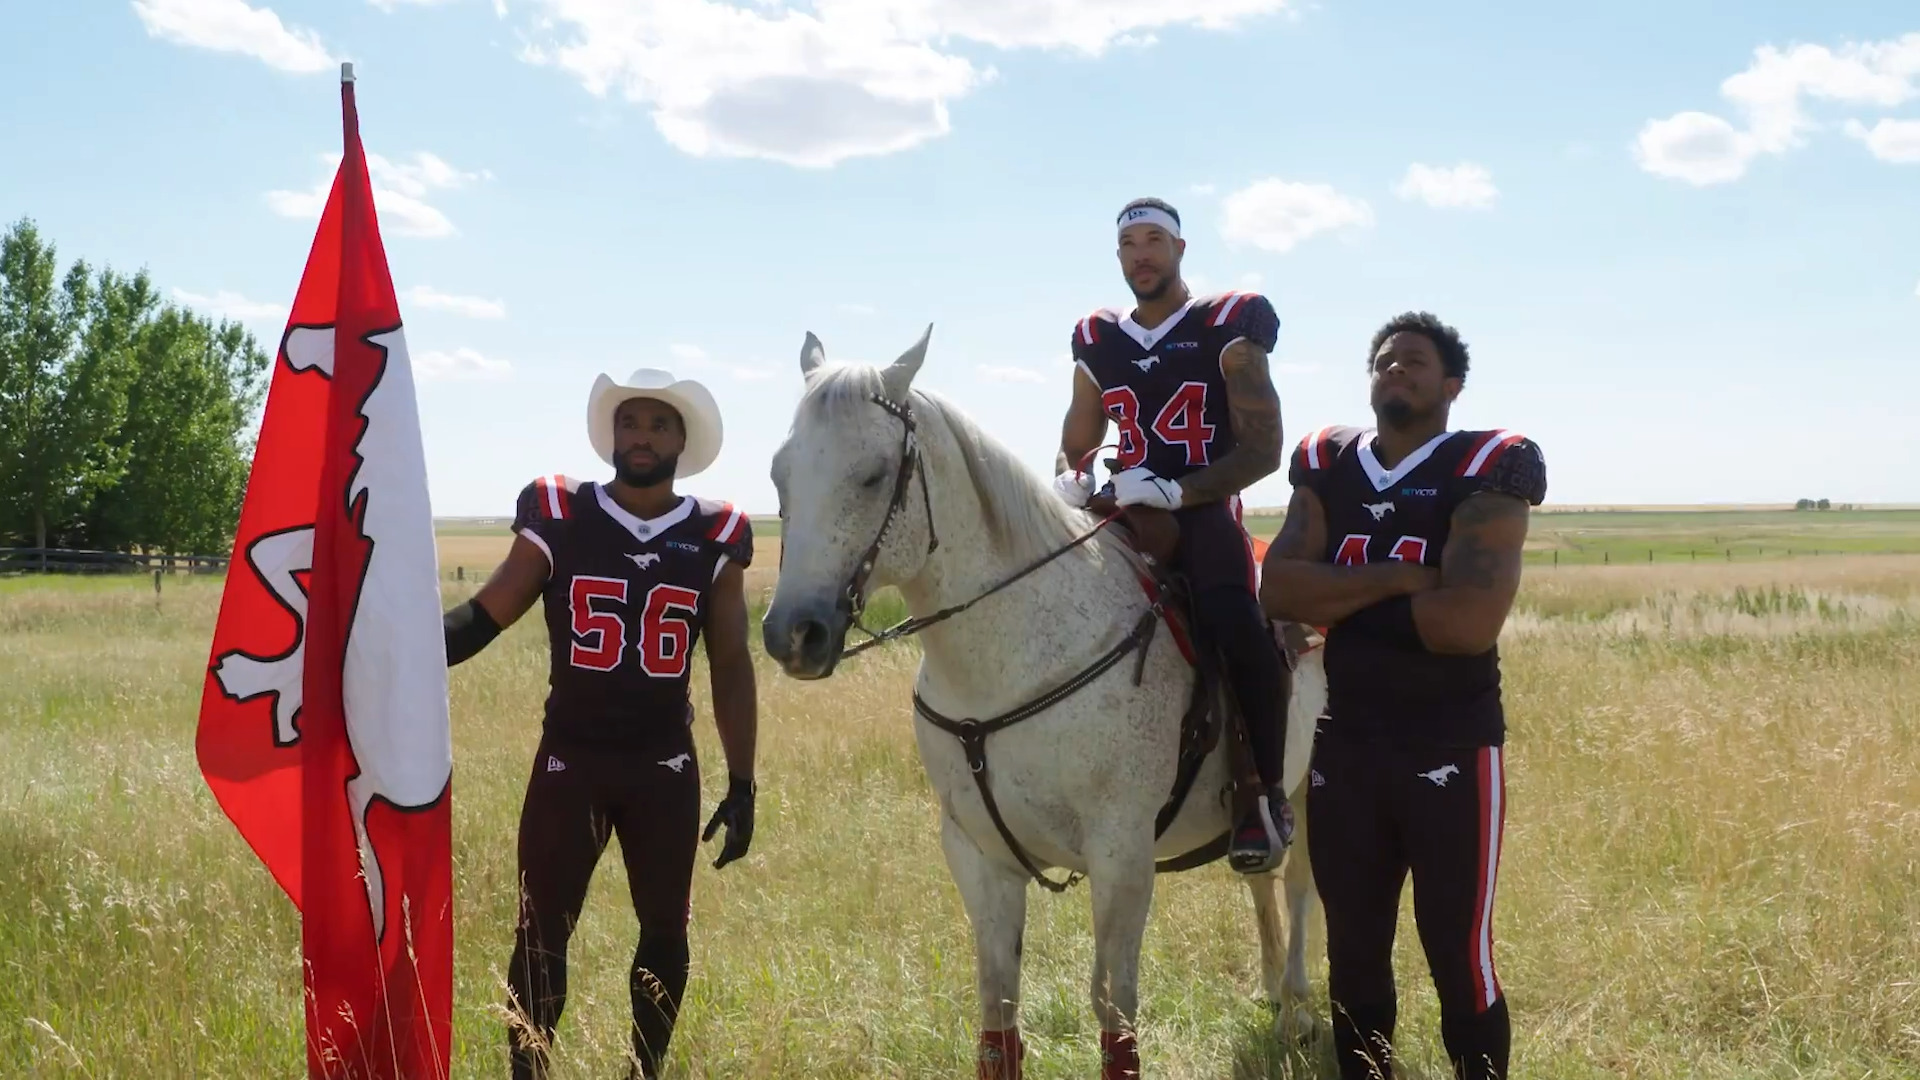 Calgary Stampeders unveil new jerseys ahead of Labour Day Classic